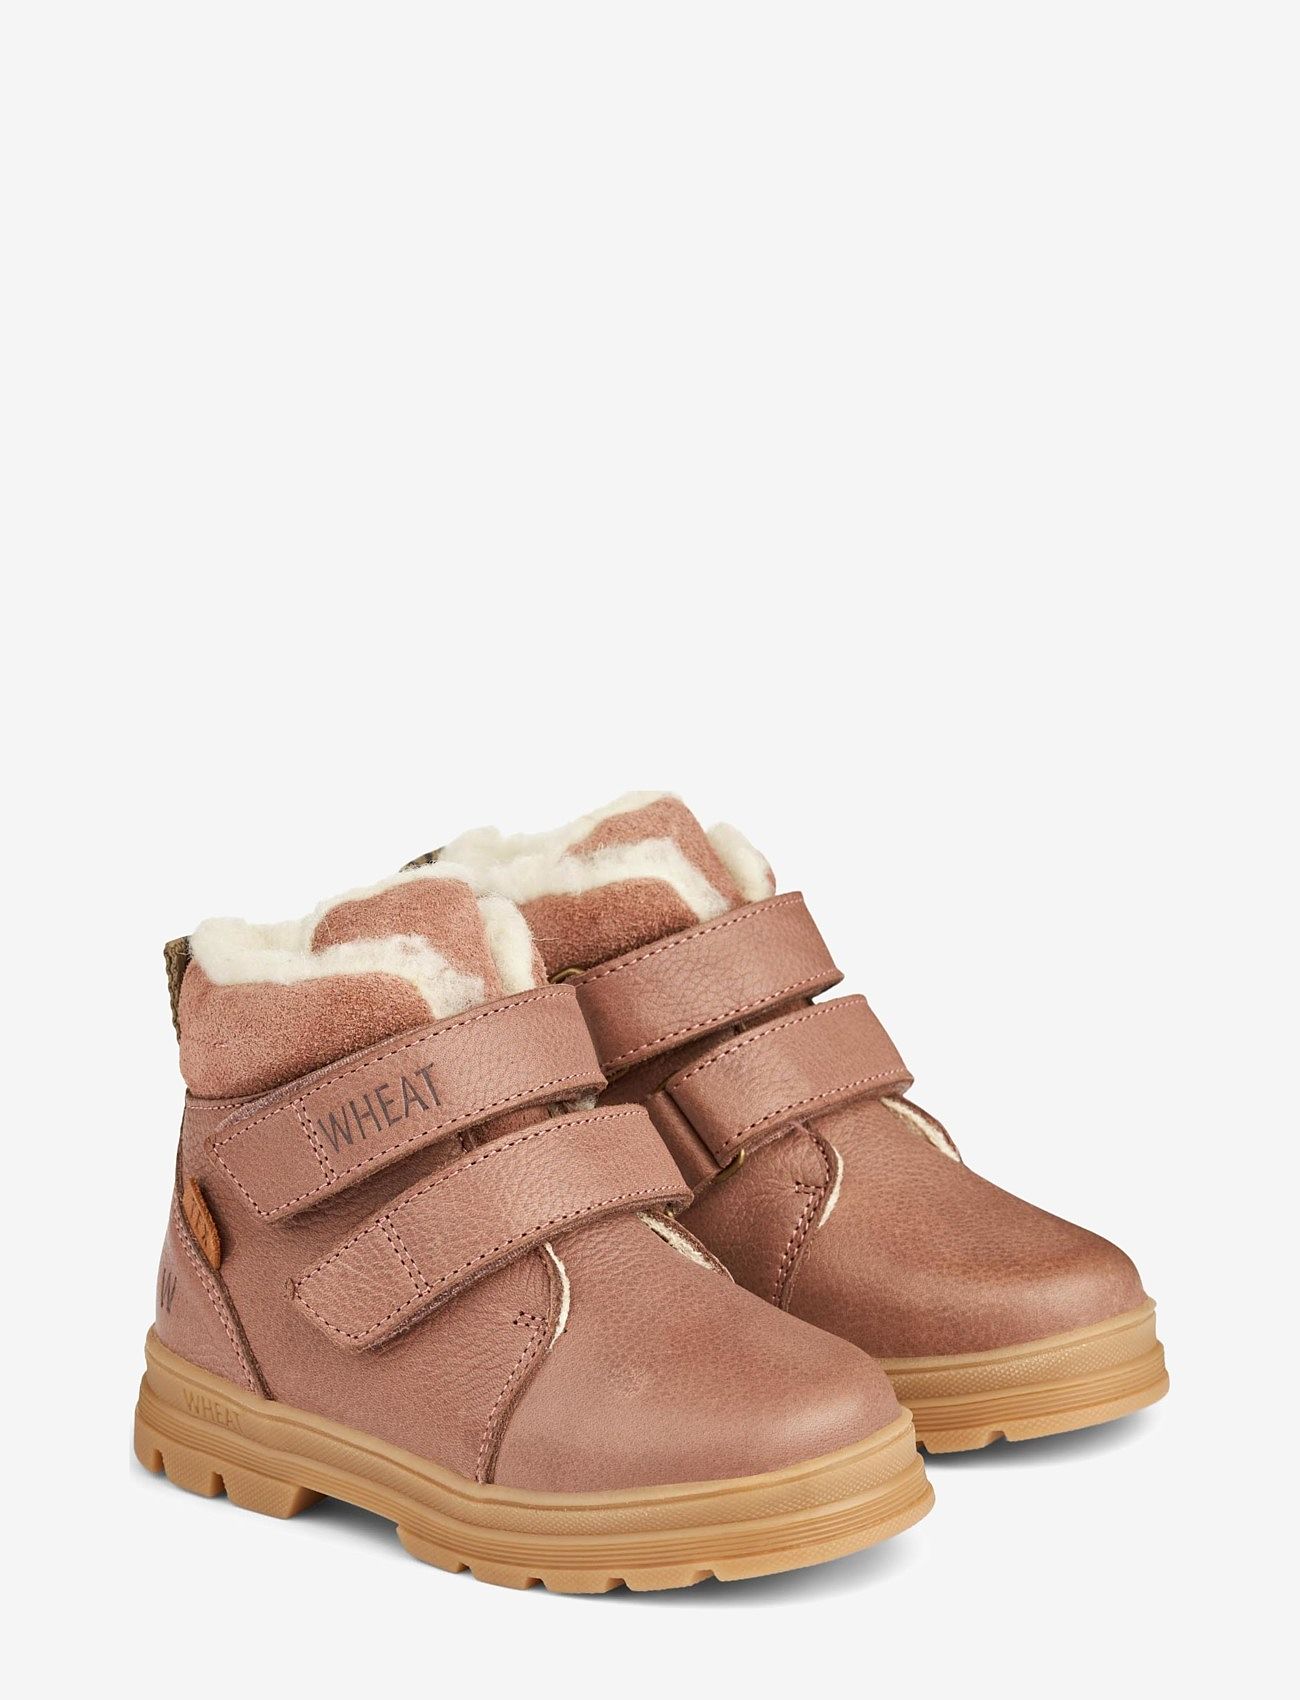 Wheat - Winterboot Dry Tex - kinder - dusty rouge - 0